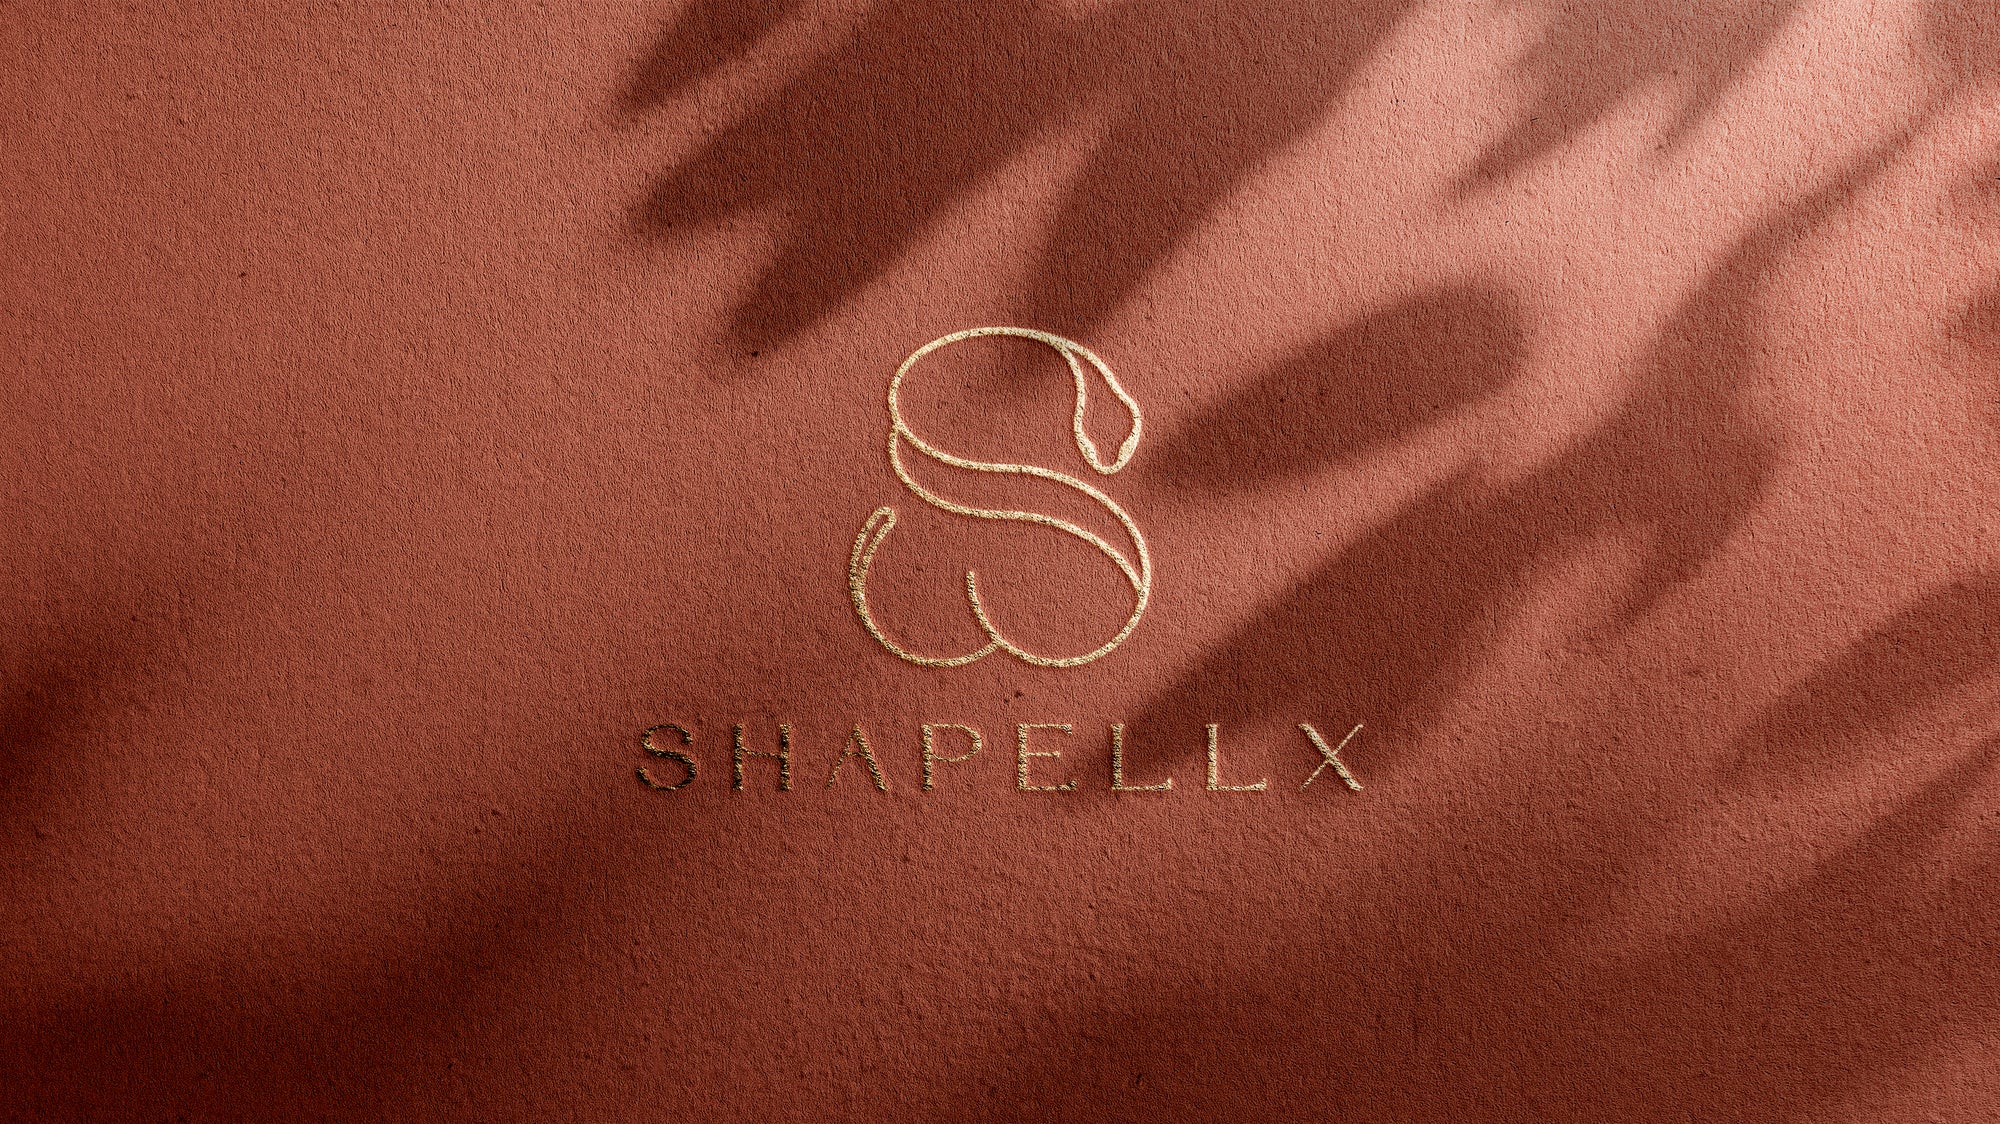 Shapellx New Logo is Here!